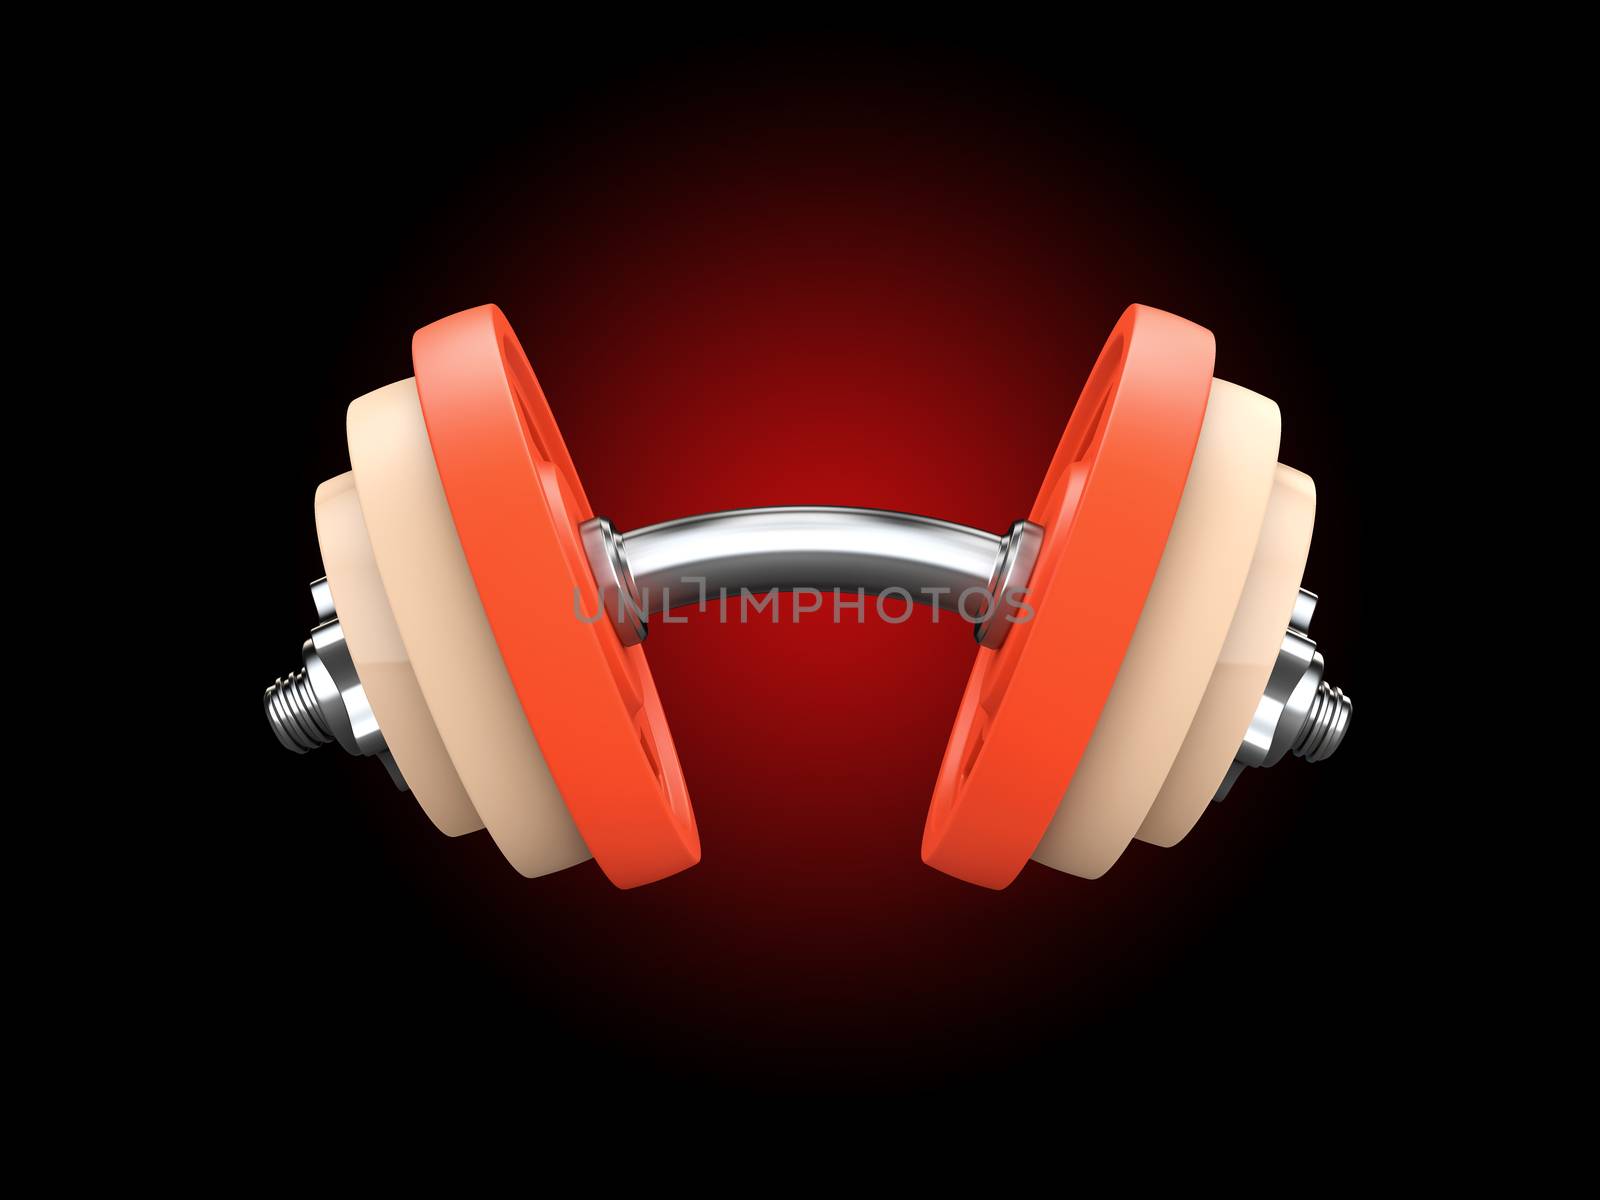 Metal dumbbell for fitness with chrome silver handle isolated on black background. 3d Illustration by tussik